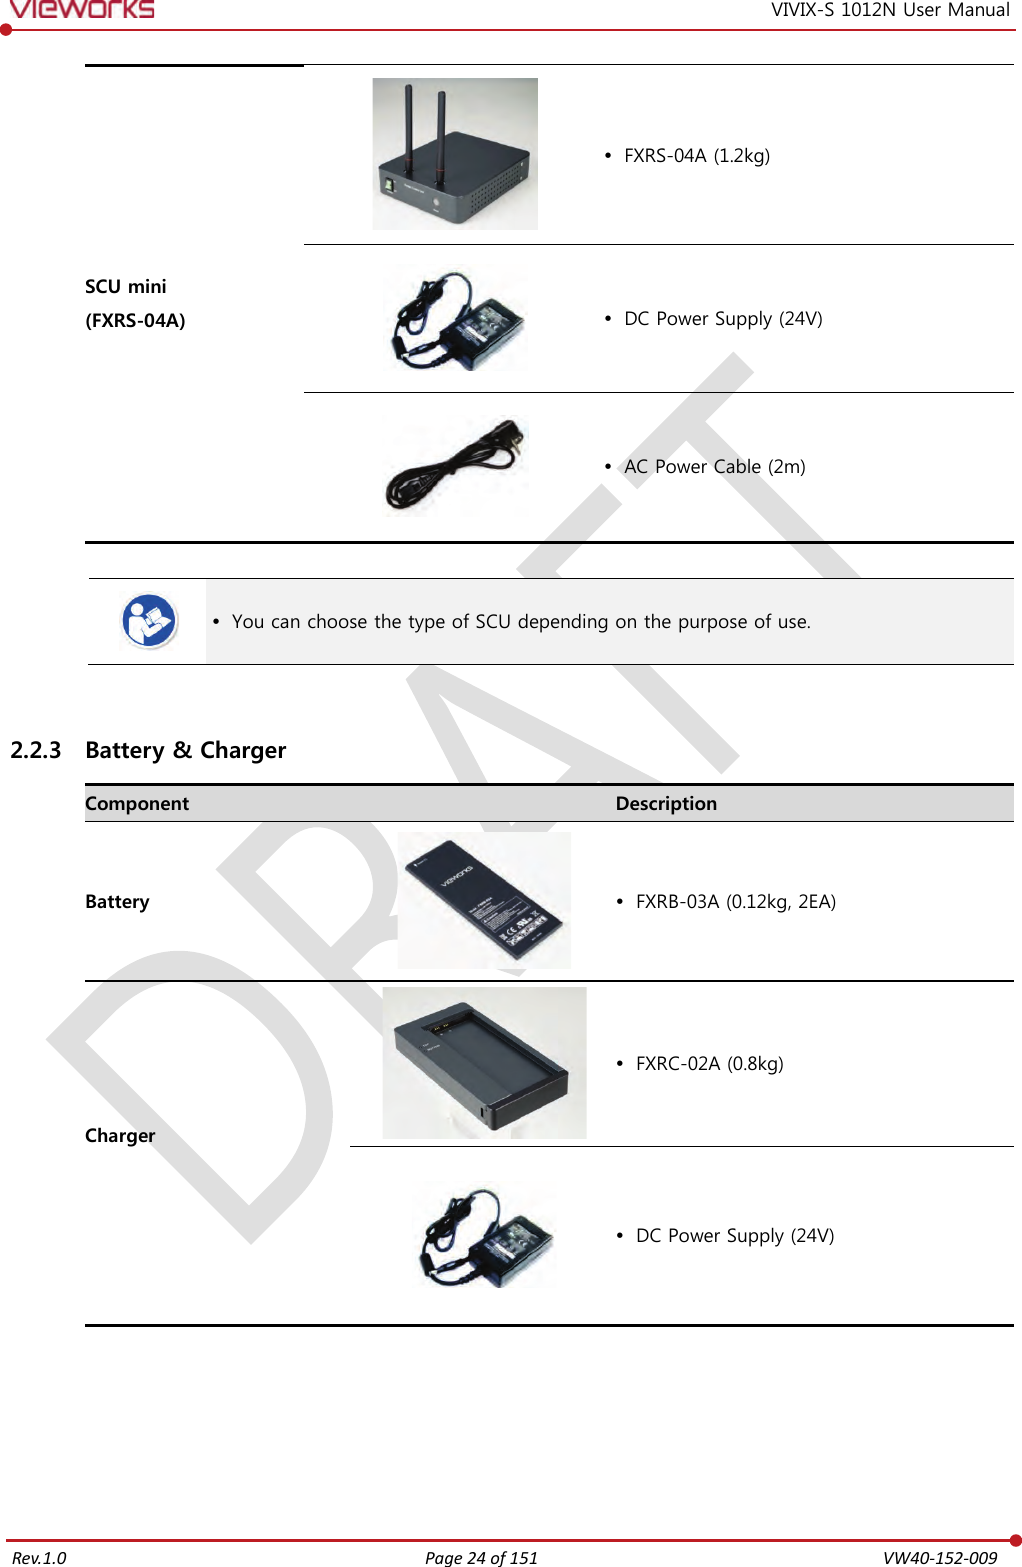   Rev.1.0 Page 24 of 151  VW40-152-009 VIVIX-S 1012N User Manual SCU mini (FXRS-04A)   FXRS-04A (1.2kg)   DC Power Supply (24V)   AC Power Cable (2m)    You can choose the type of SCU depending on the purpose of use.  2.2.3 Battery &amp; Charger Component  Description Battery   FXRB-03A (0.12kg, 2EA) Charger    FXRC-02A (0.8kg)   DC Power Supply (24V)    